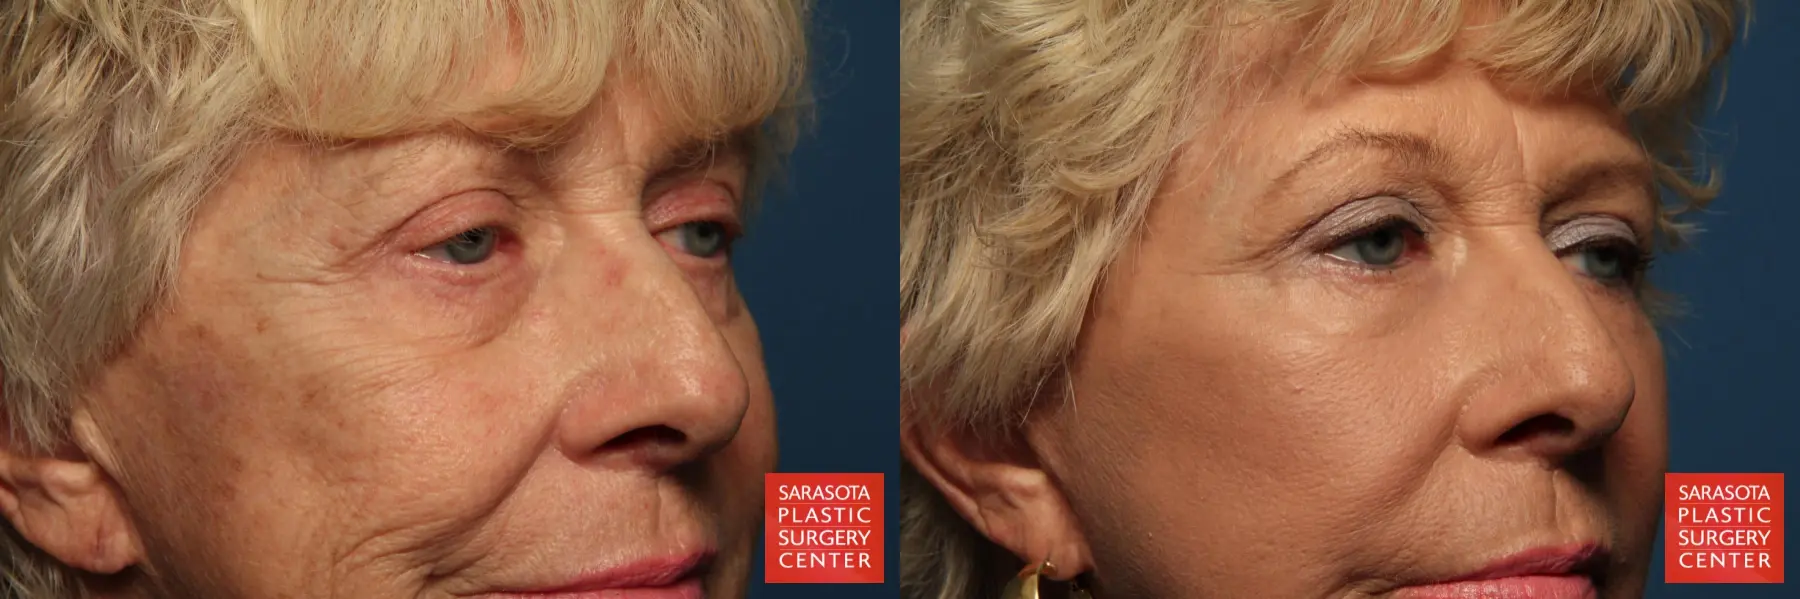 Fat Transfer - Face: Patient 7 - Before and After 4